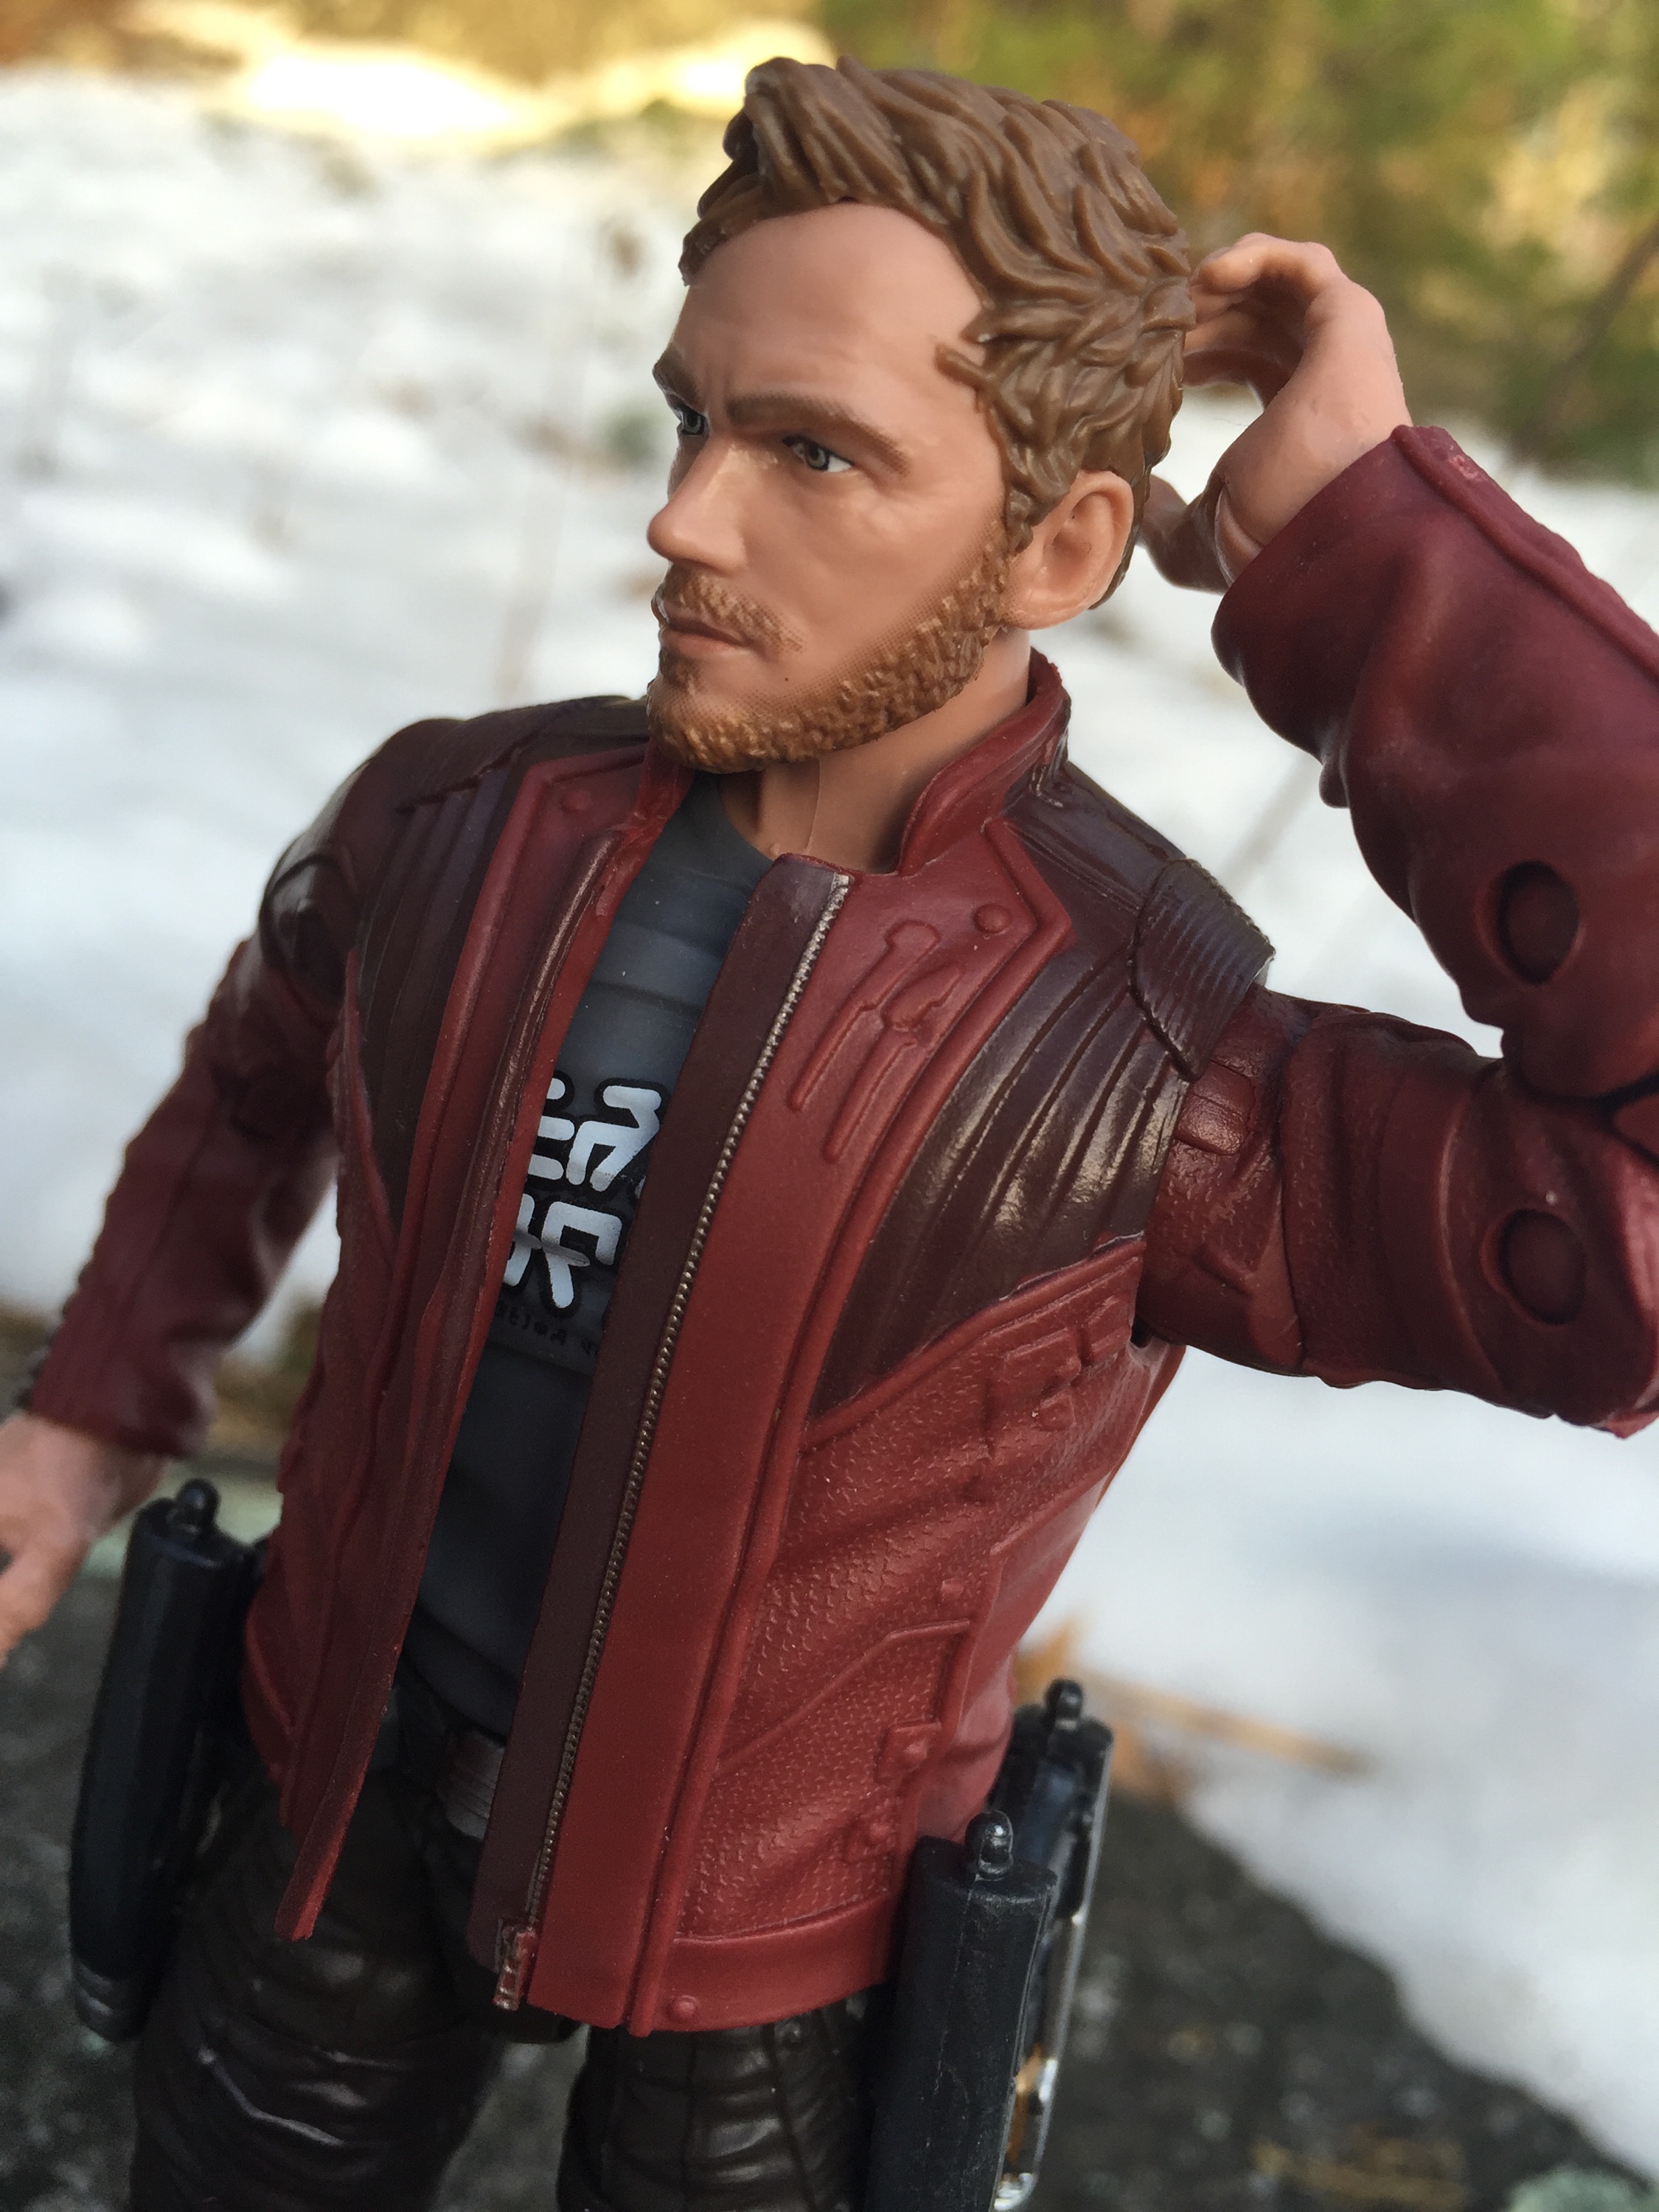 2017 Marvel Legends Star-Lord 6 Figure Review GOTG Vol. 2 - Marvel Toy News